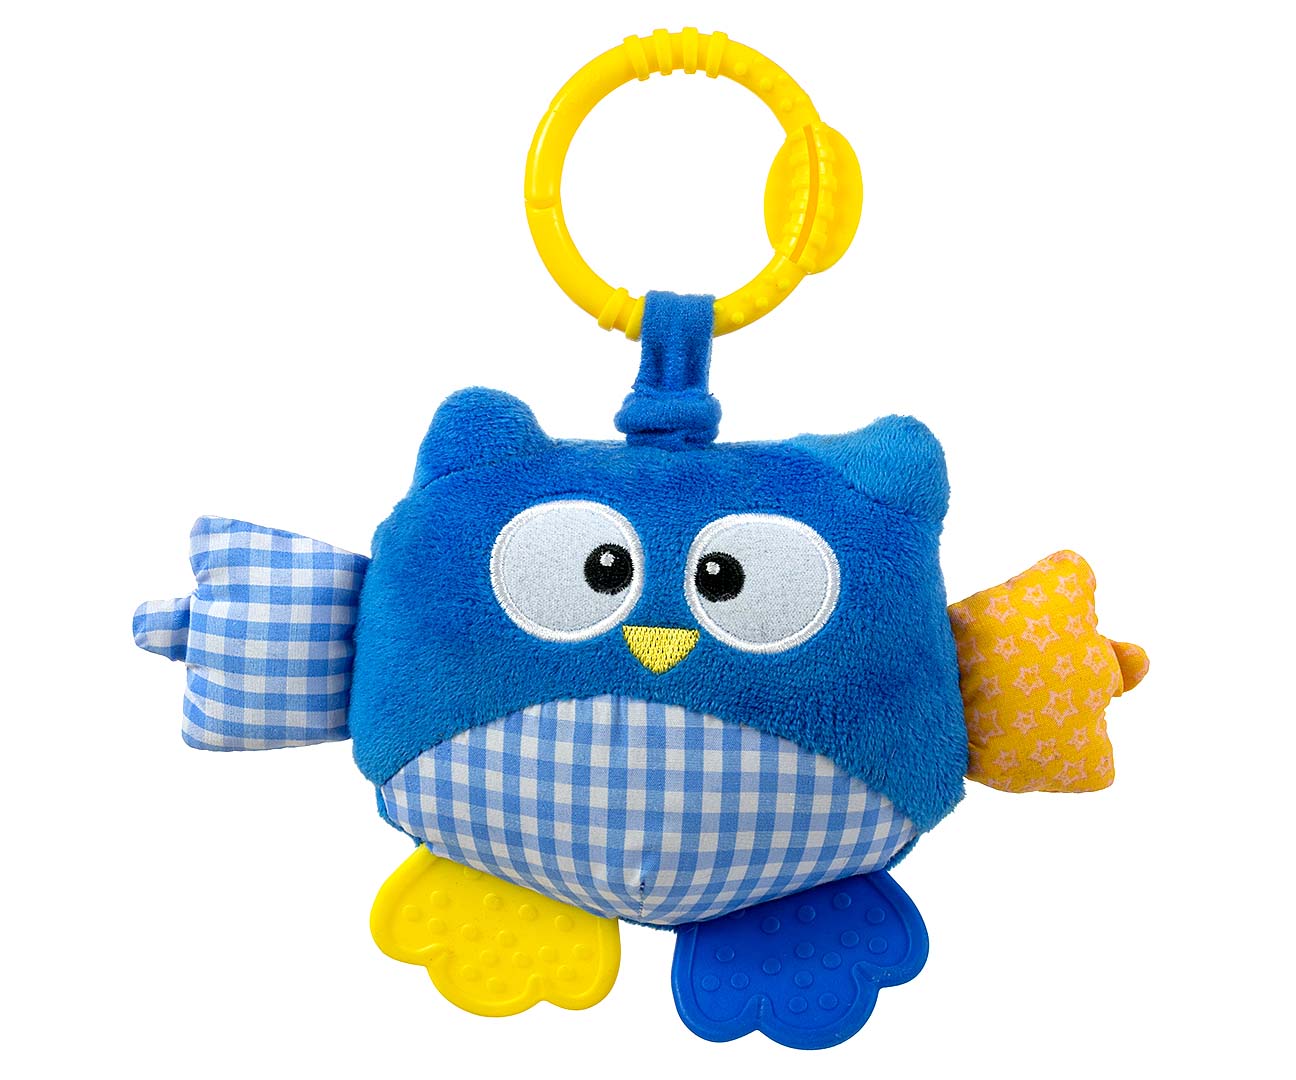 Milly Mally Plush hanging toy - Cutie owl - 2881 ..